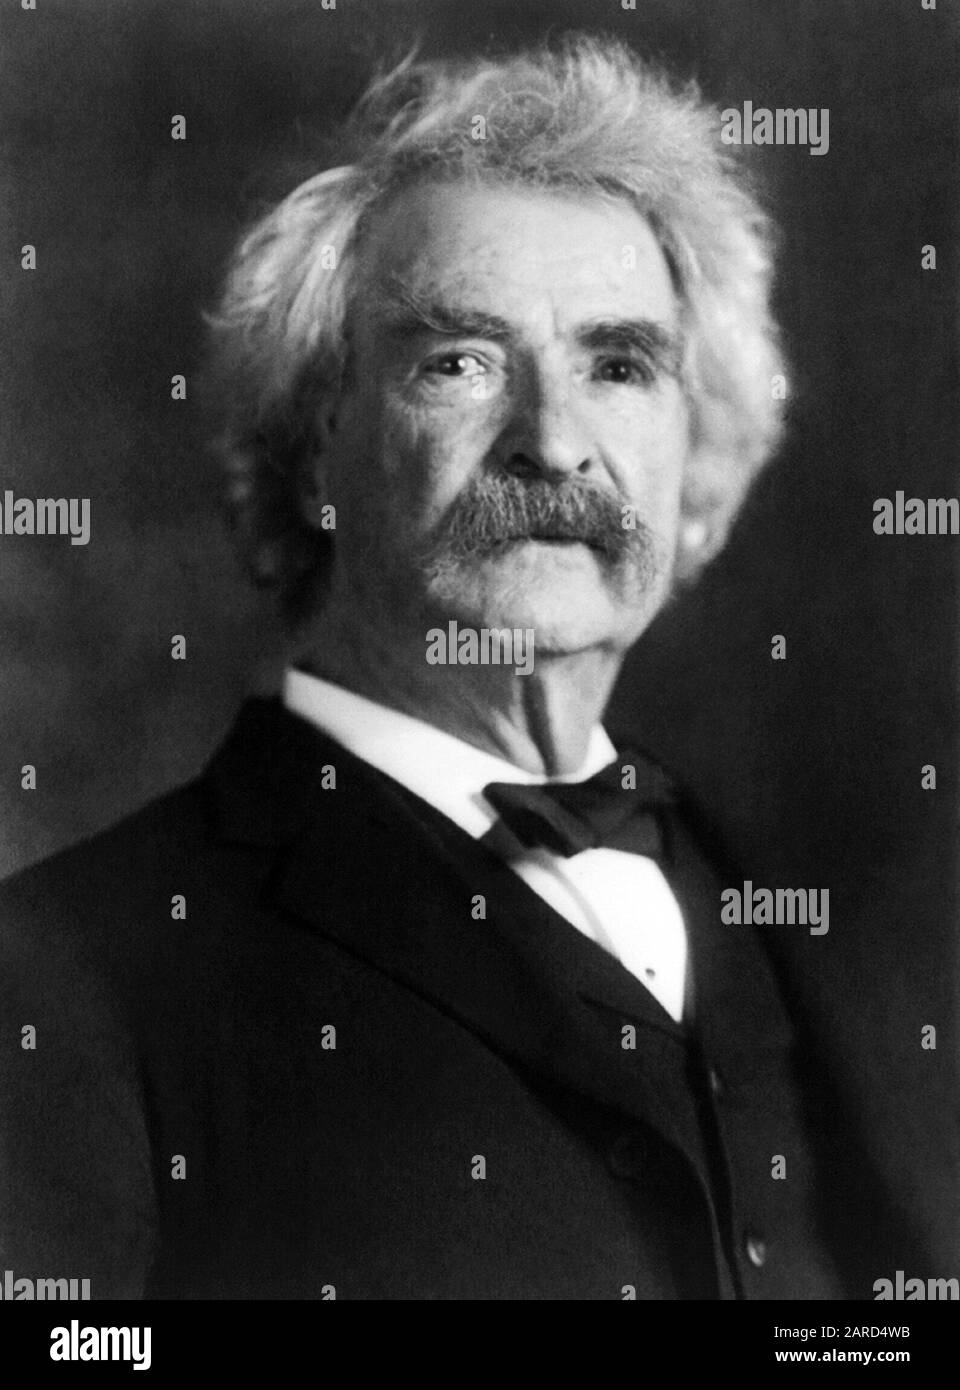 Vintage portrait photo of American writer and humourist Samuel Langhorne Clemens (1835 – 1910), better known by his pen name of Mark Twain. Photo circa 1906 by Pach Brothers. Stock Photo